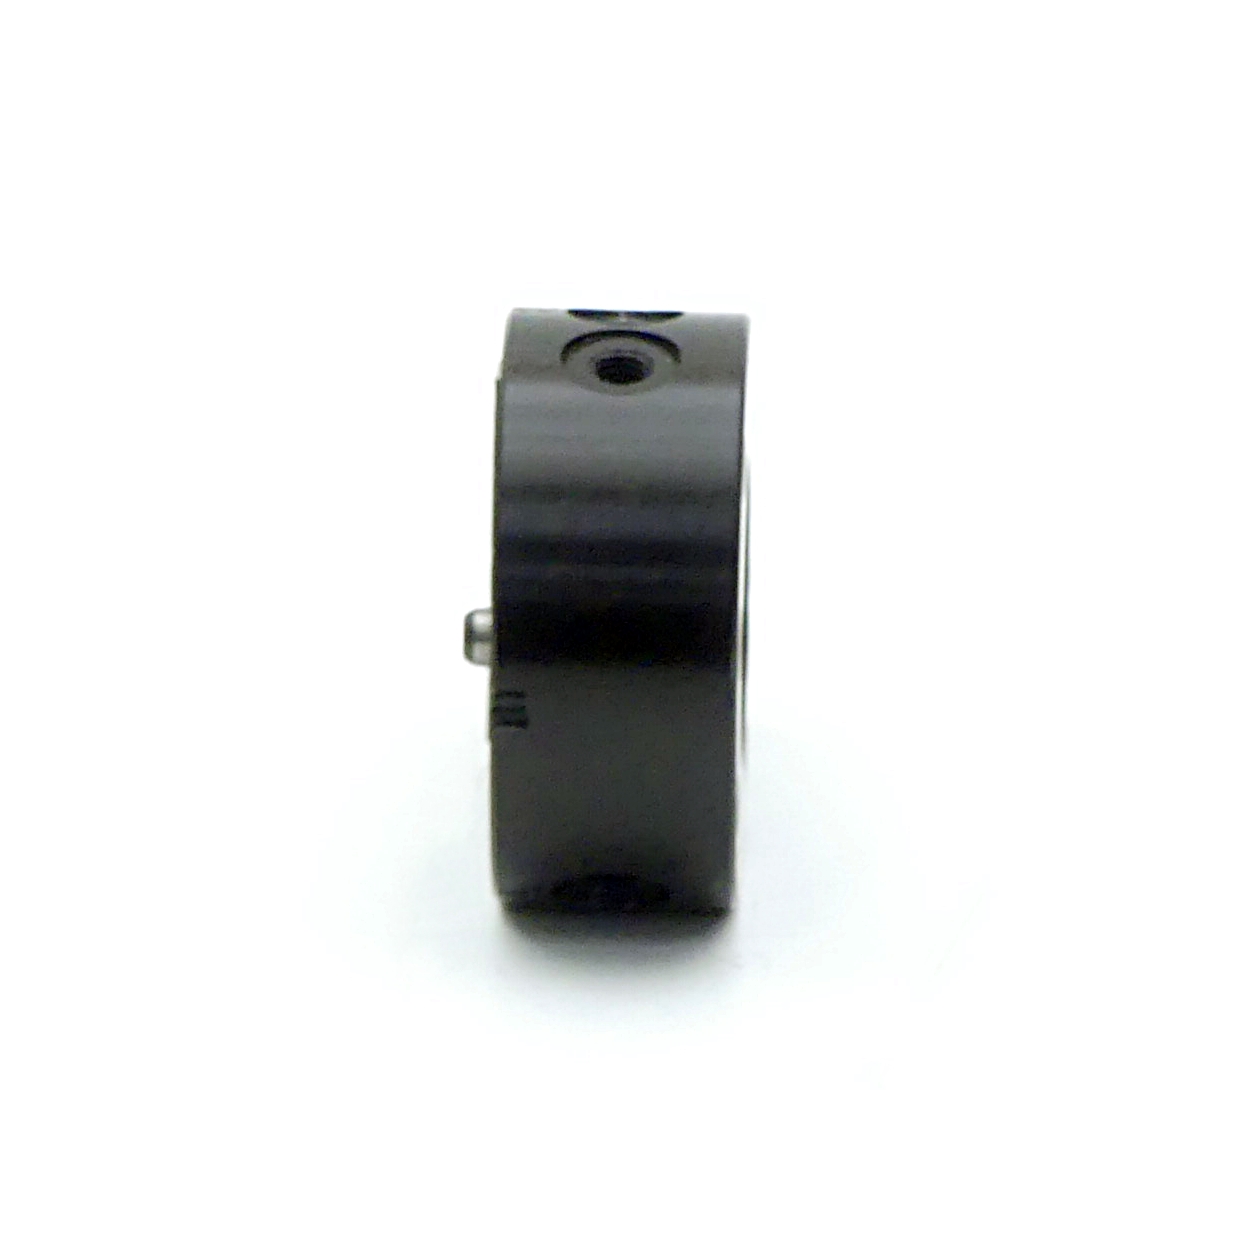 Electrical feedthrough module SWO-A15-K with fast changing adaptor 0302317 